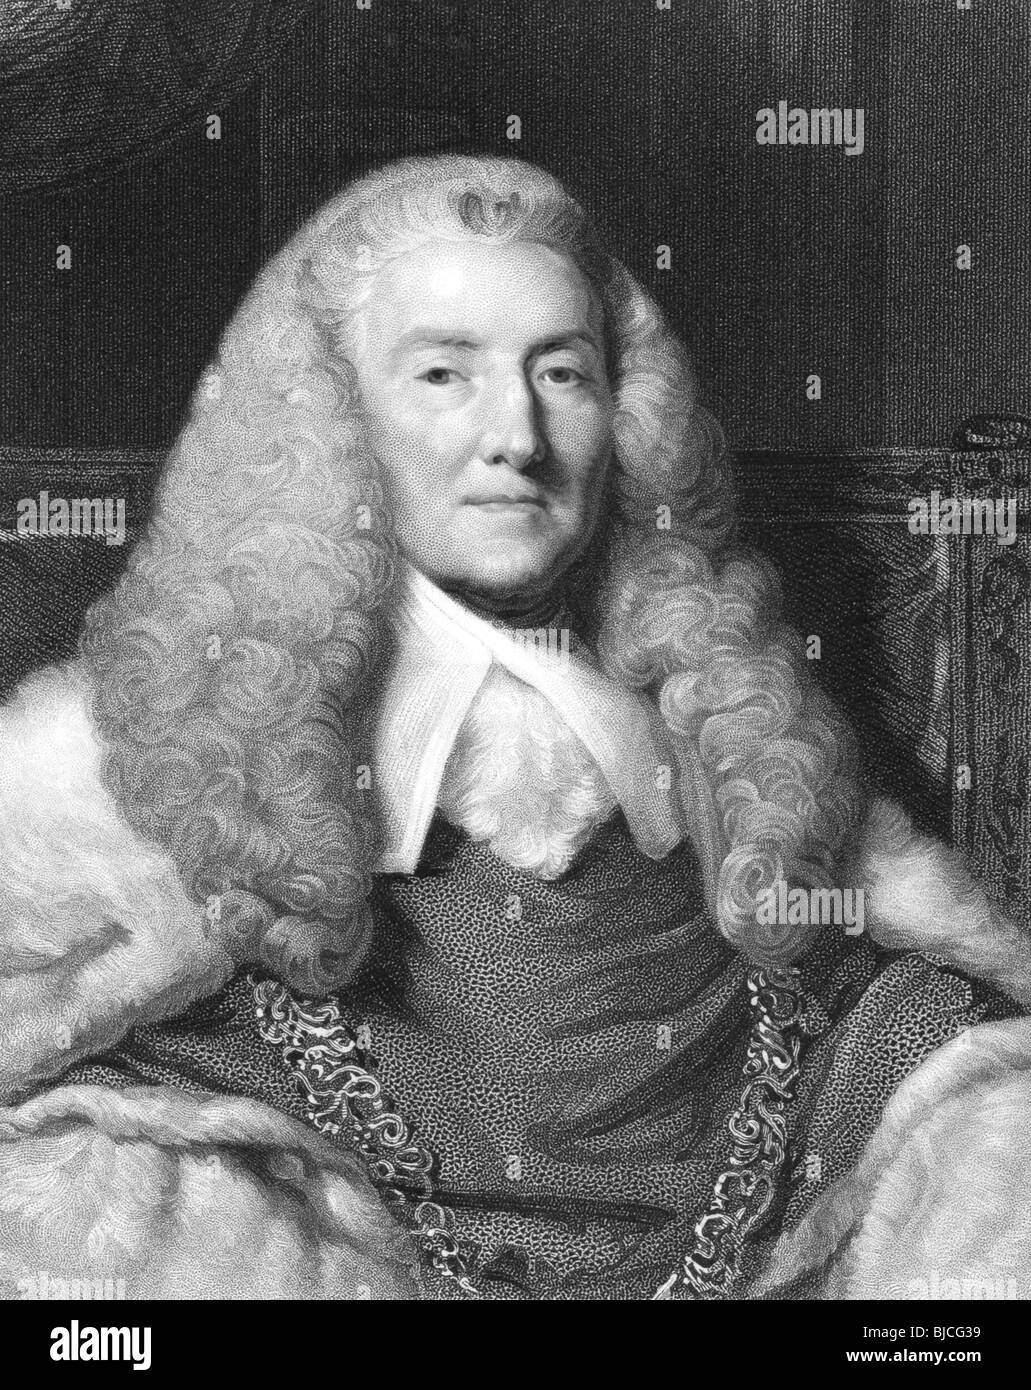 William Murray, 1st Earl of Mansfield (1705-1793) on engraving from the 1800s. British barrister, politician and judge. Stock Photo